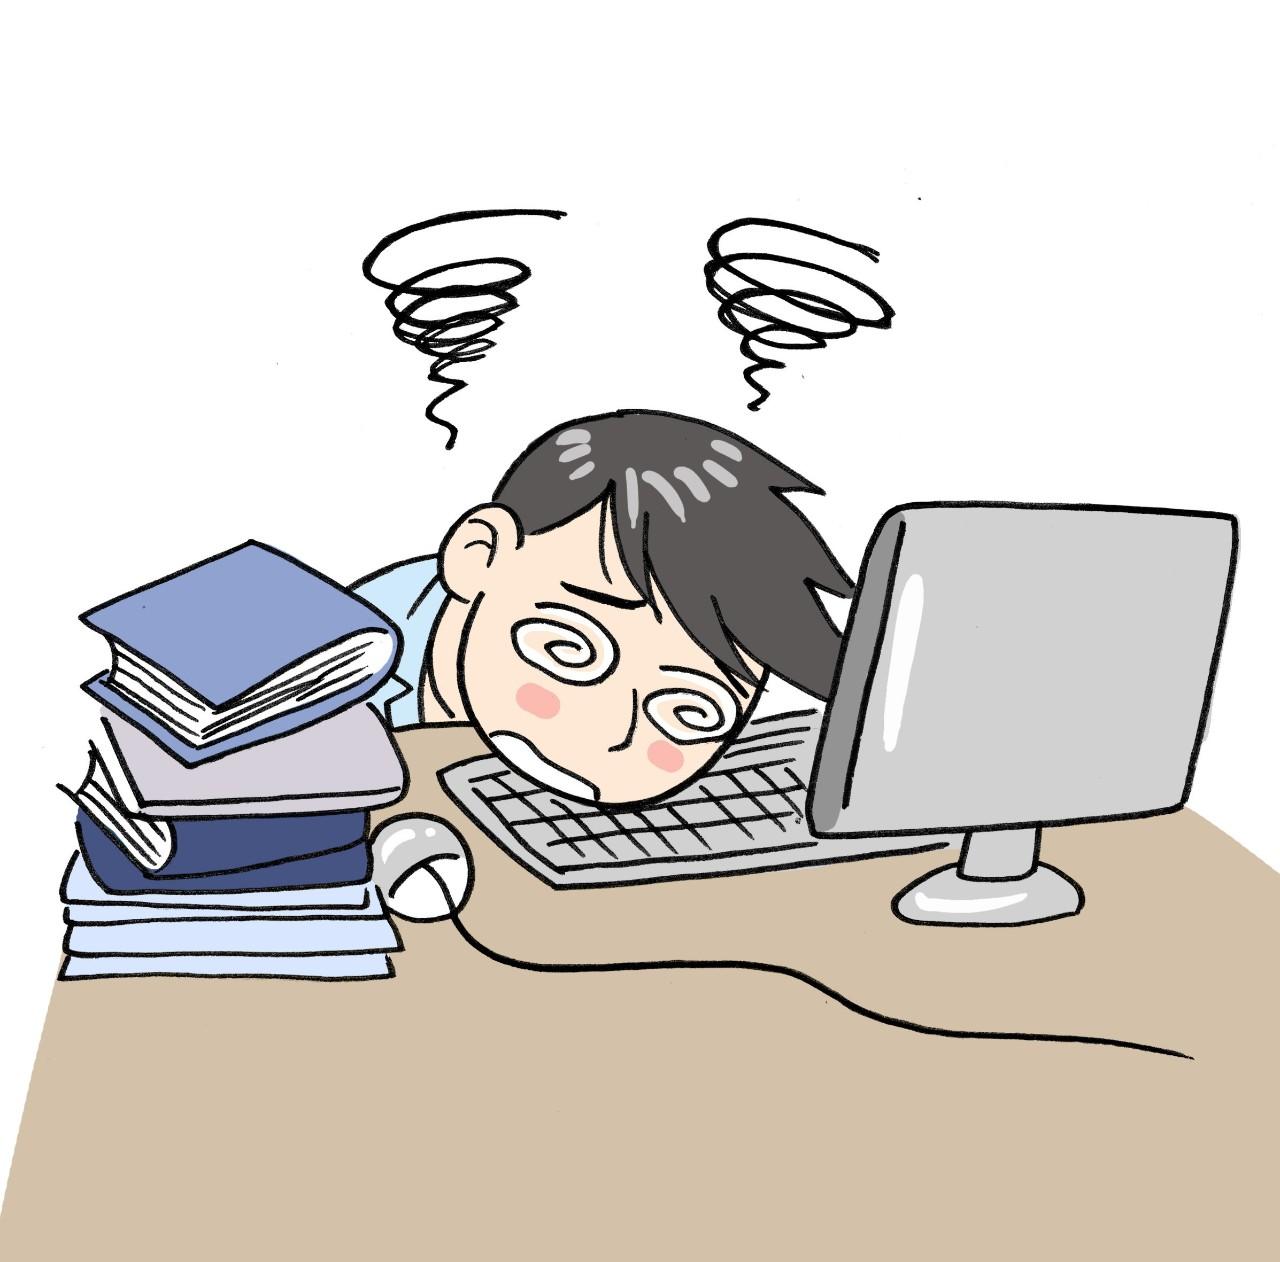 Tired Man On The Desk, Desk, Careless, Man PNG Picture And Clipart ...